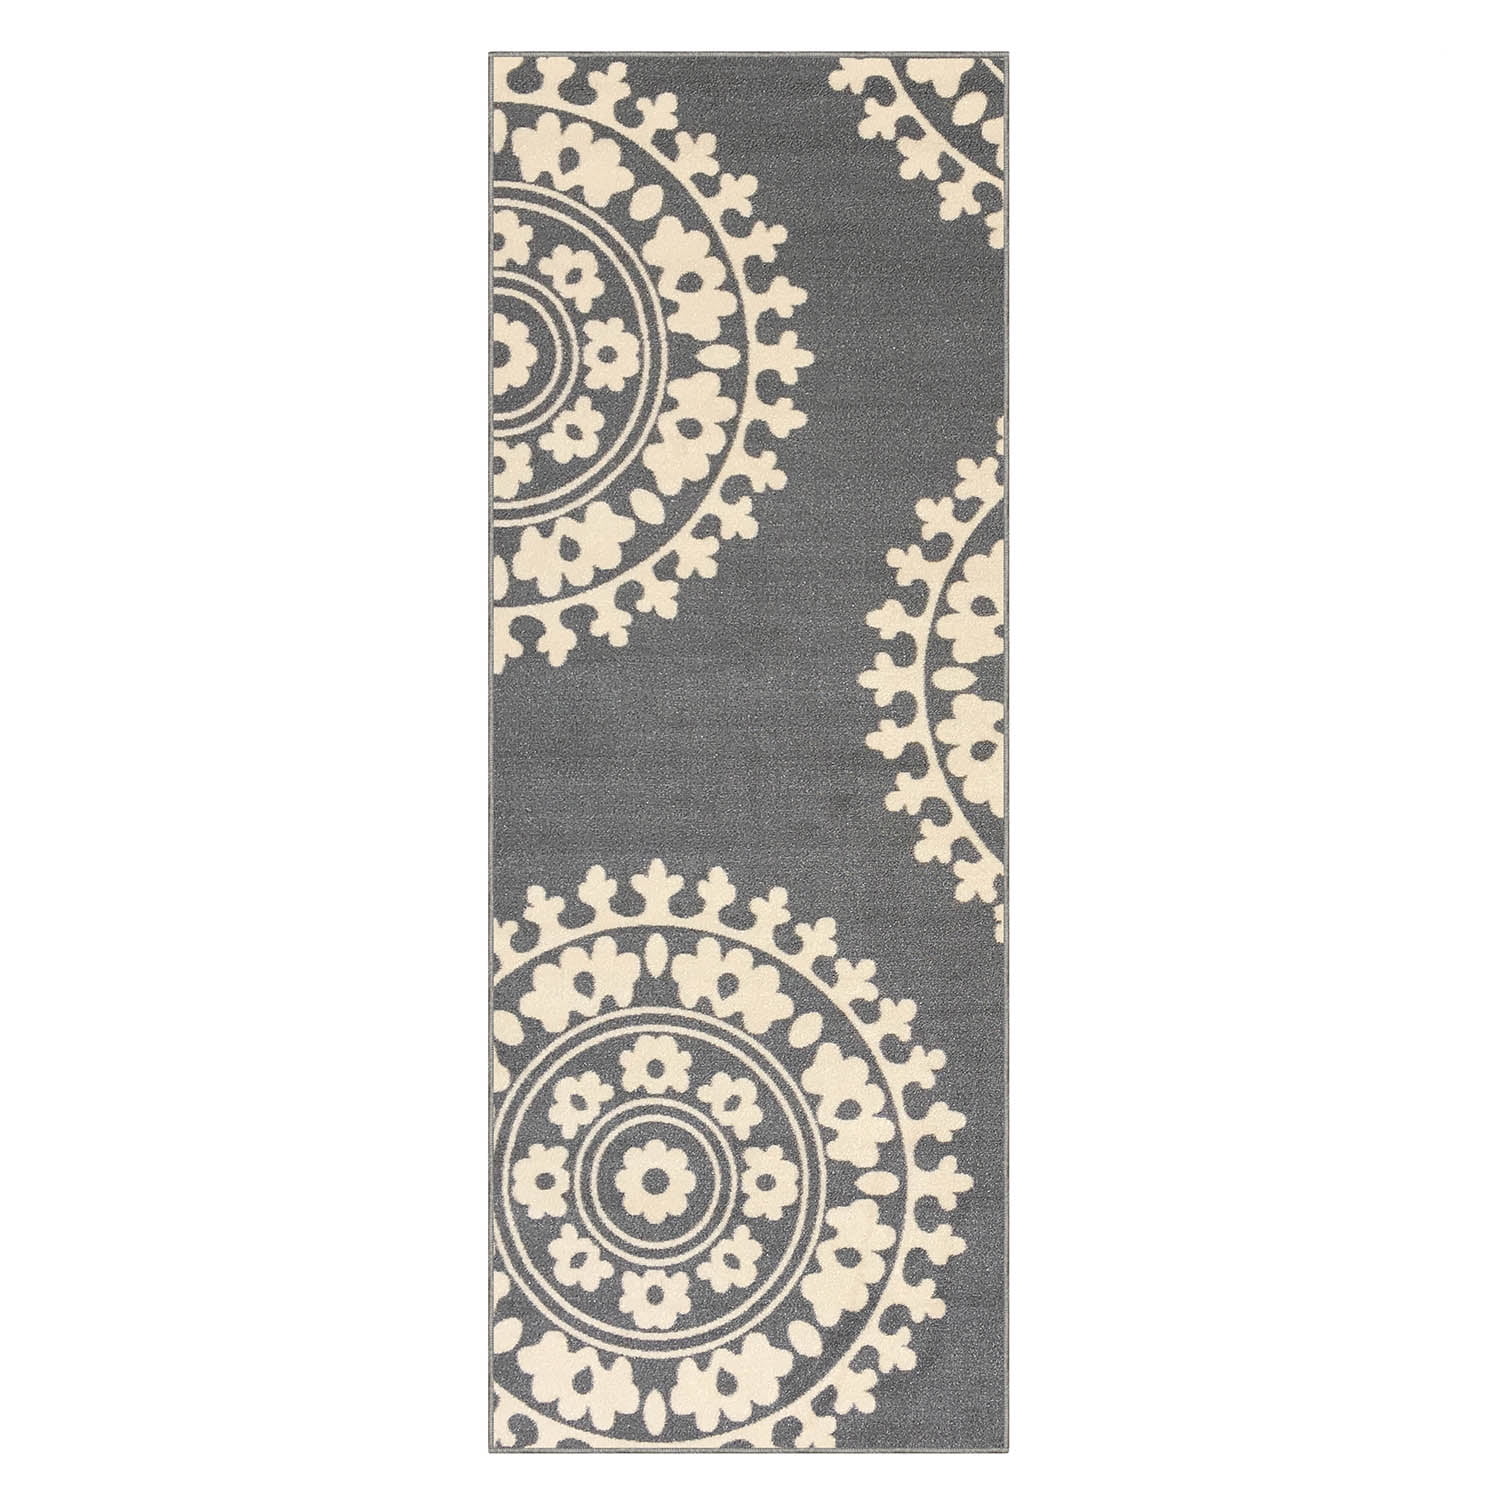  Runner Rug 2FT x 6FT, AYOHA Utility Carpet Runner for Entryway  Hallway Aisles Balcony Garages, Area Rugs with Non-Slip Rubber Backing,  Grey Strip (Available Custom Sizes) : Home & Kitchen